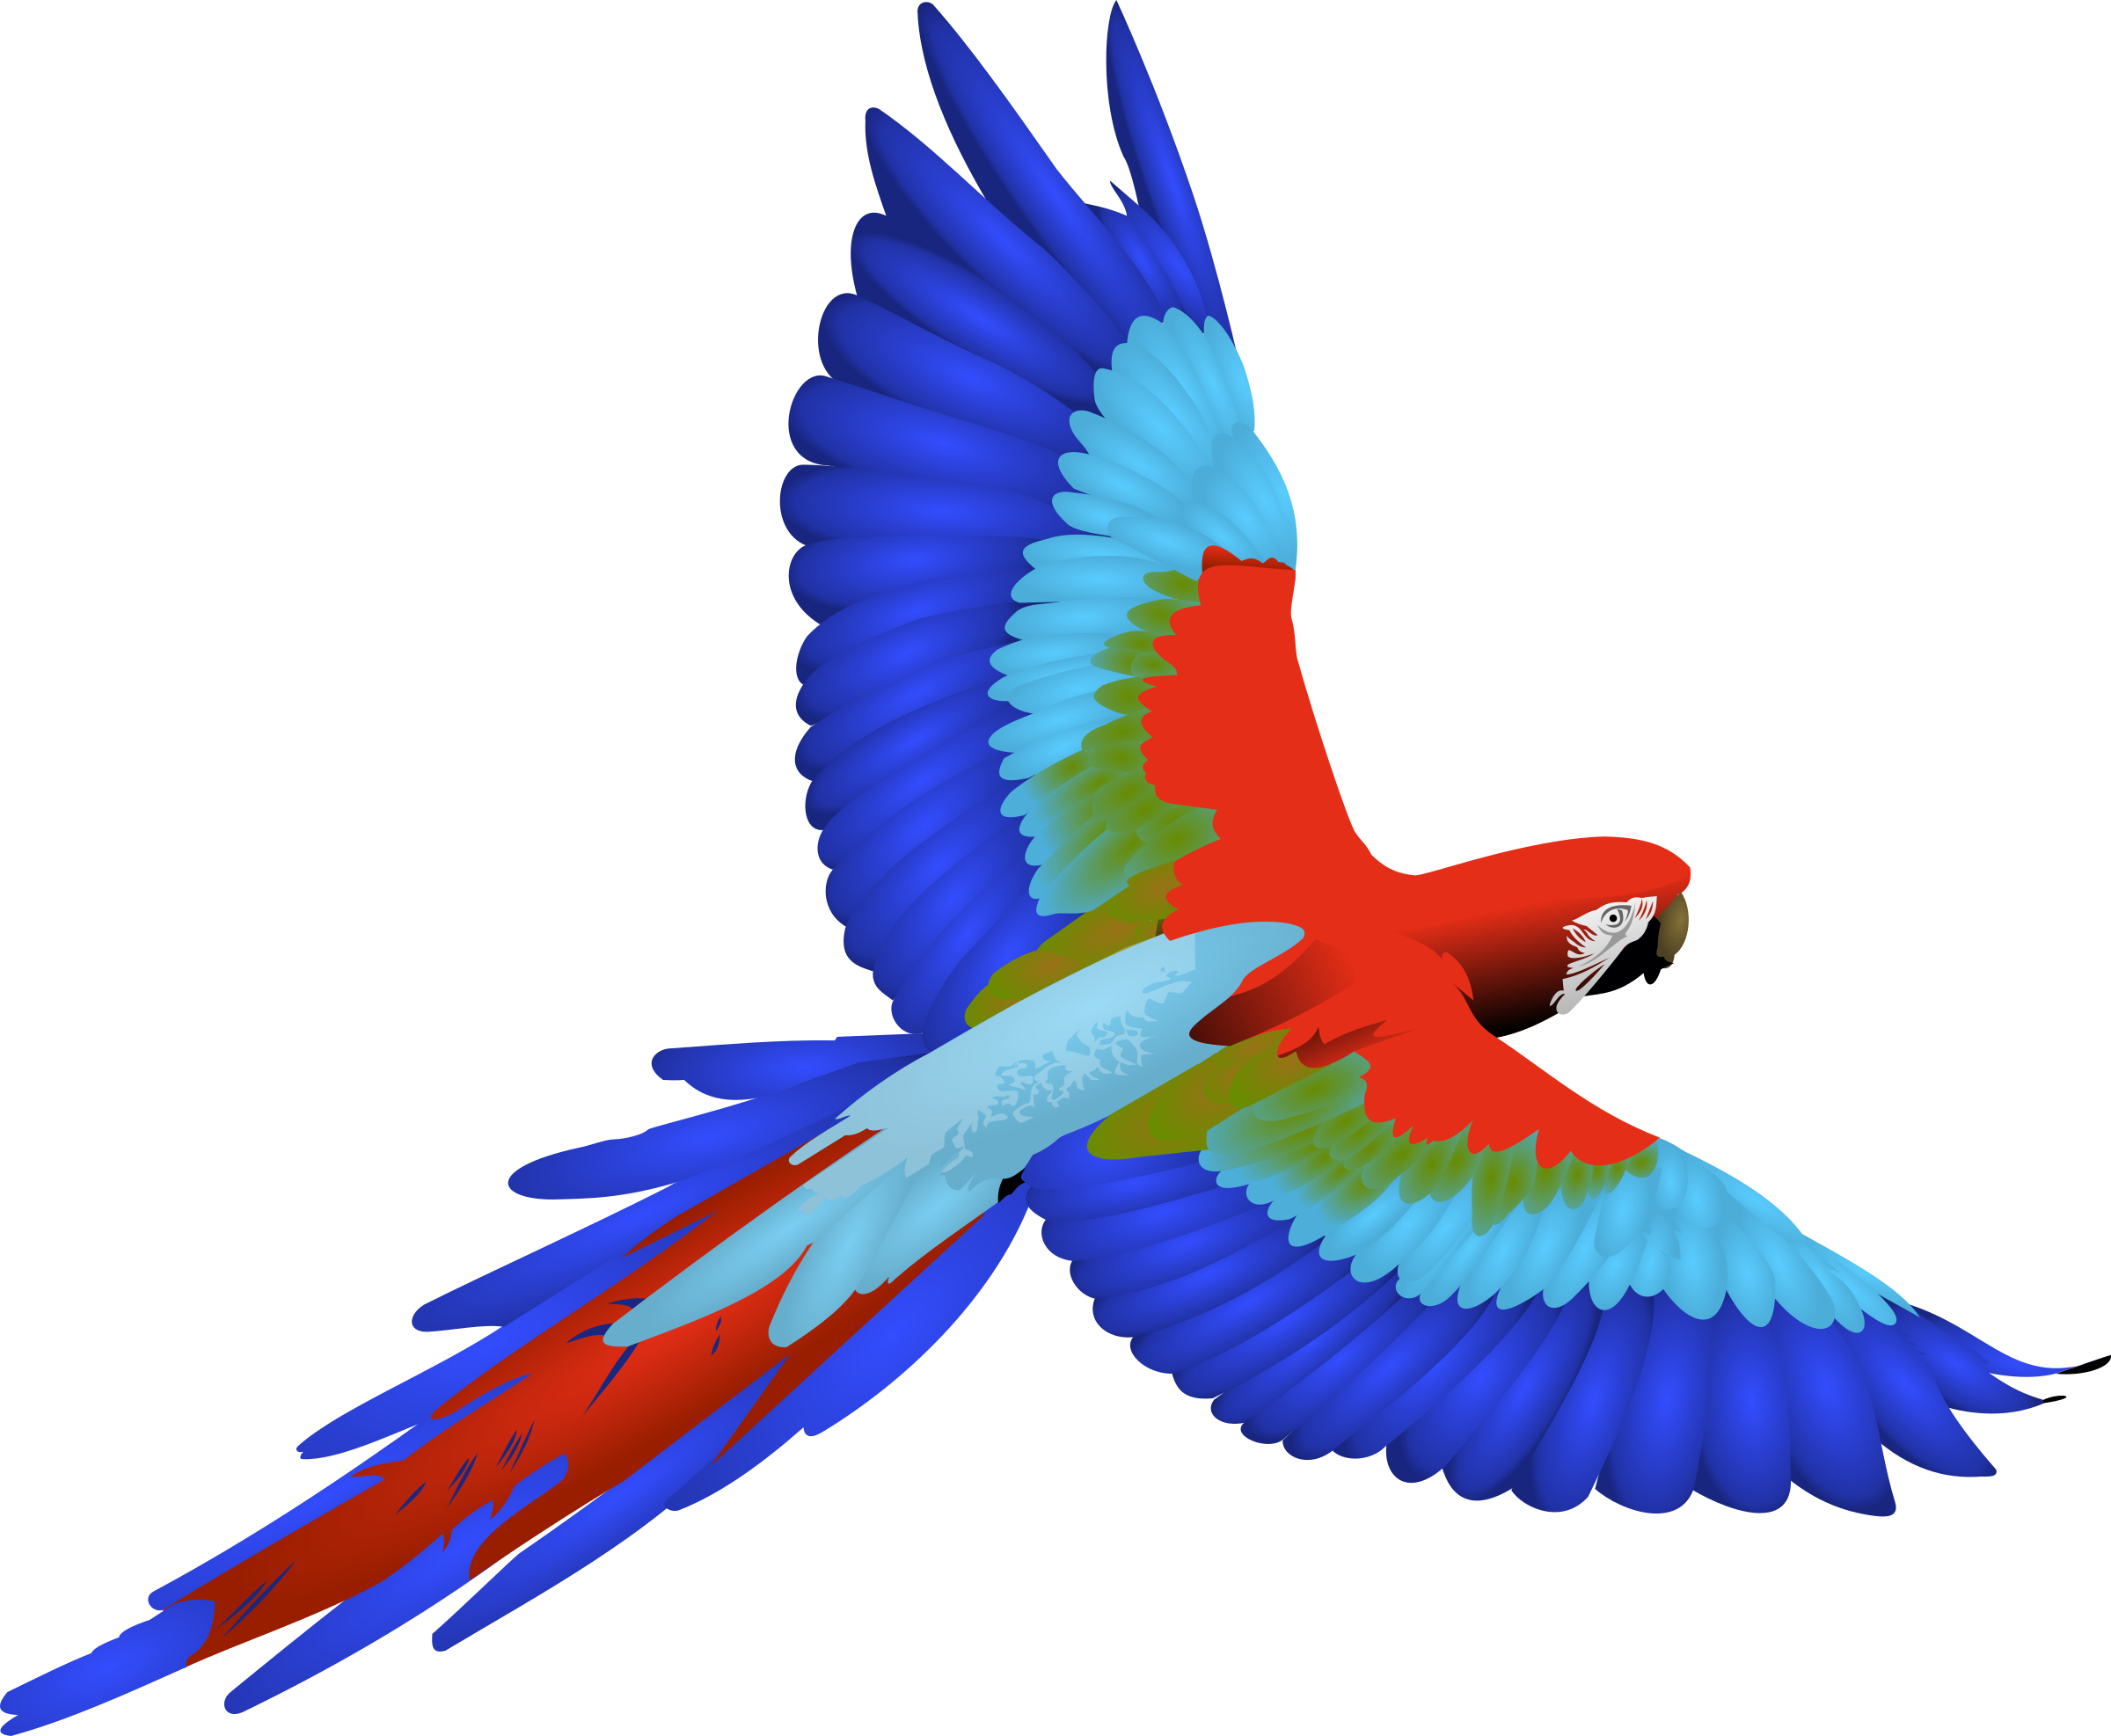 A Colorful Bird Flying In The Sky